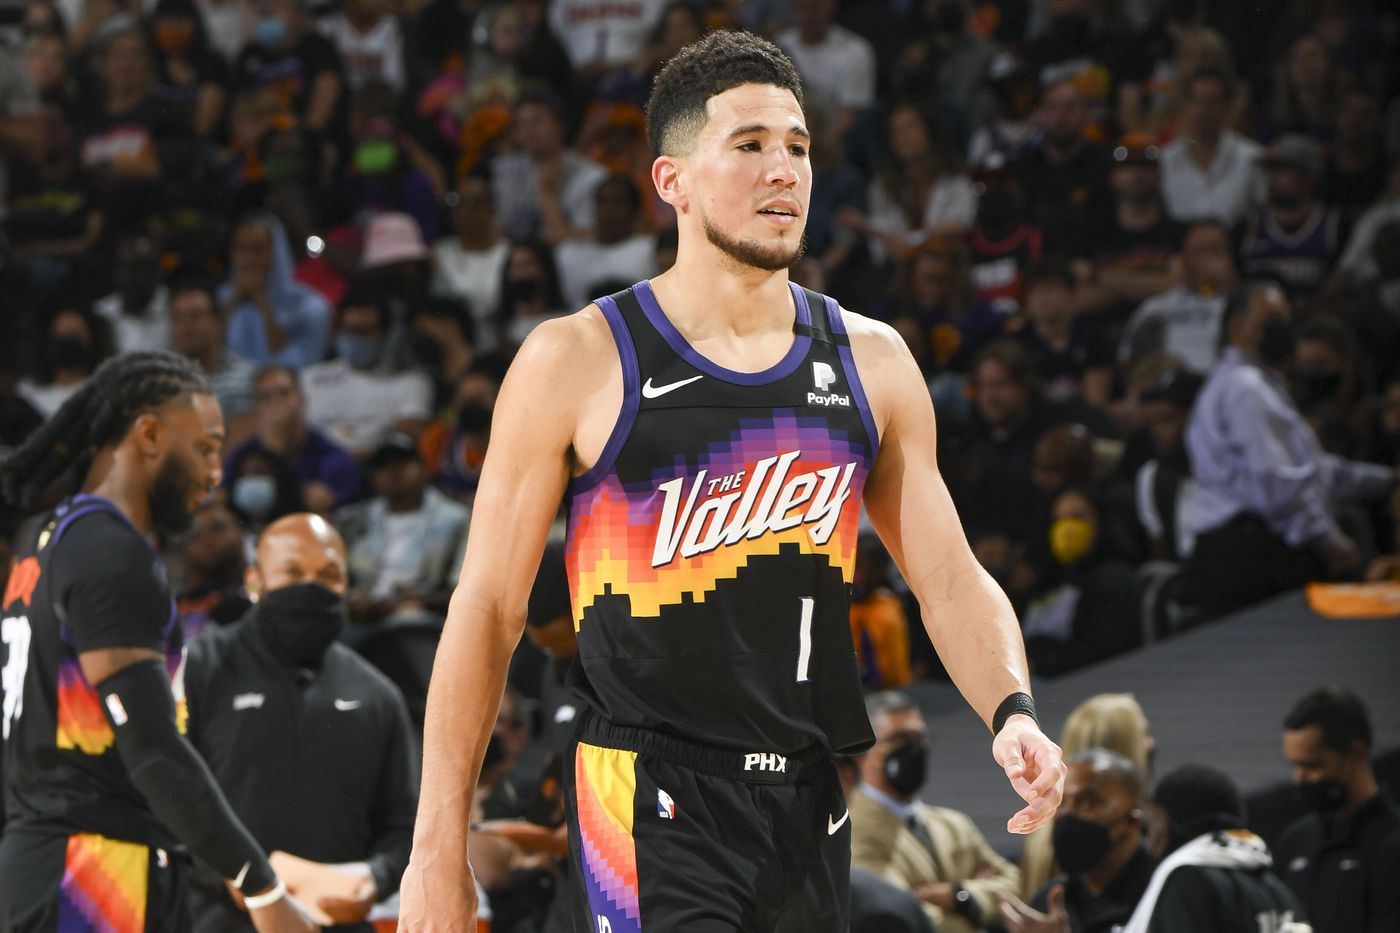 Suns will forego 75th Anniversary uniforms, keep City Edition in